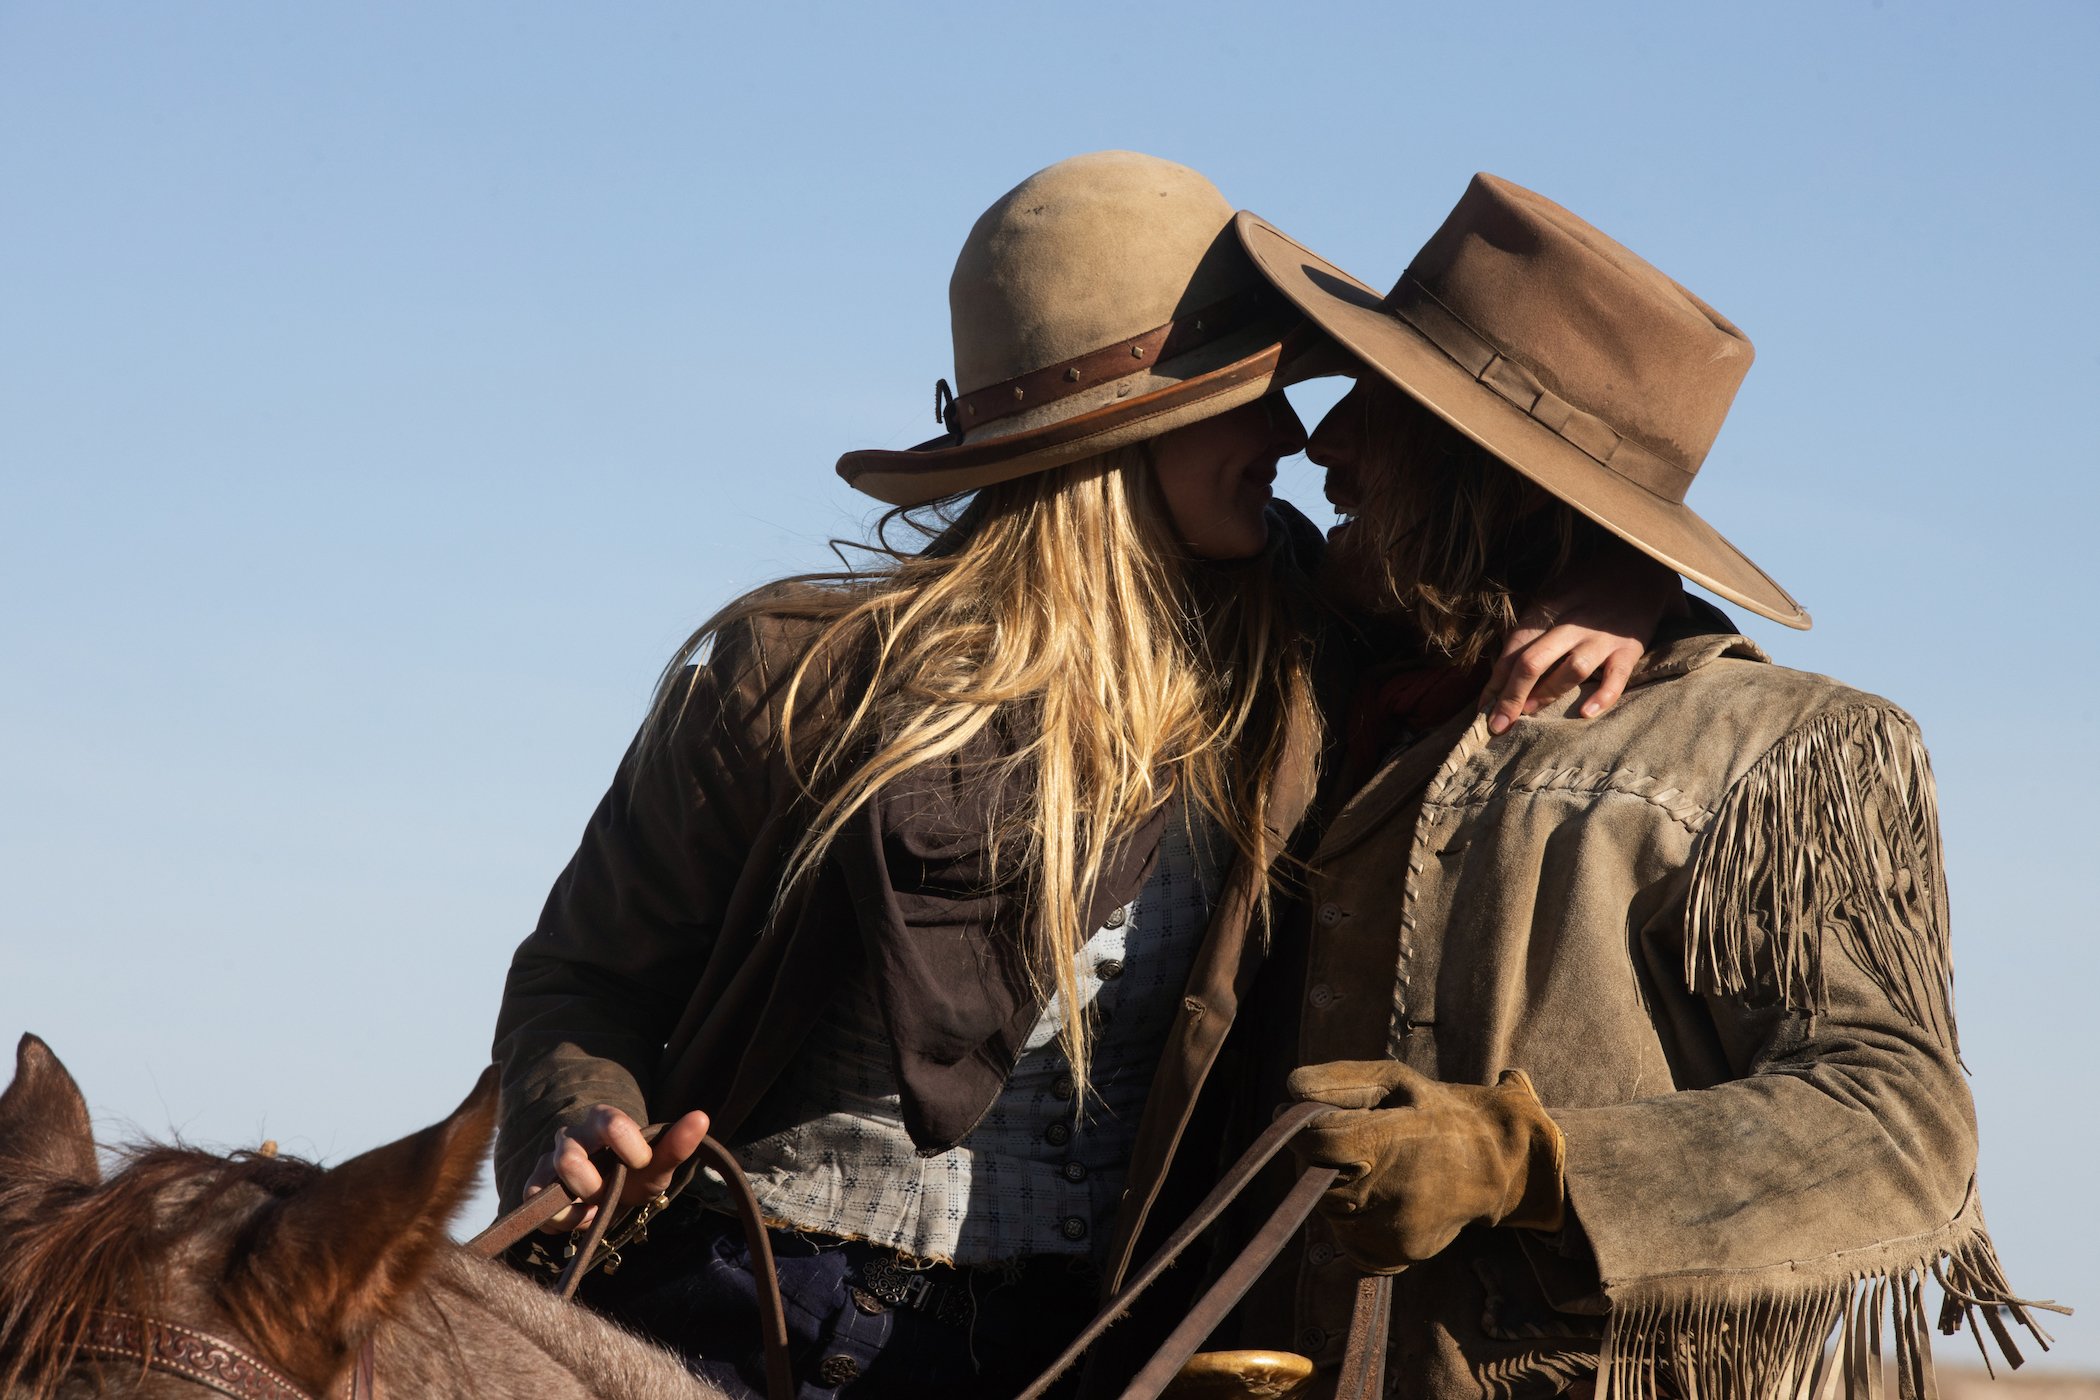 Isabel May as Elsa and Eric Nelsen as Ennis about to kiss while riding horses in '1883' episode 5